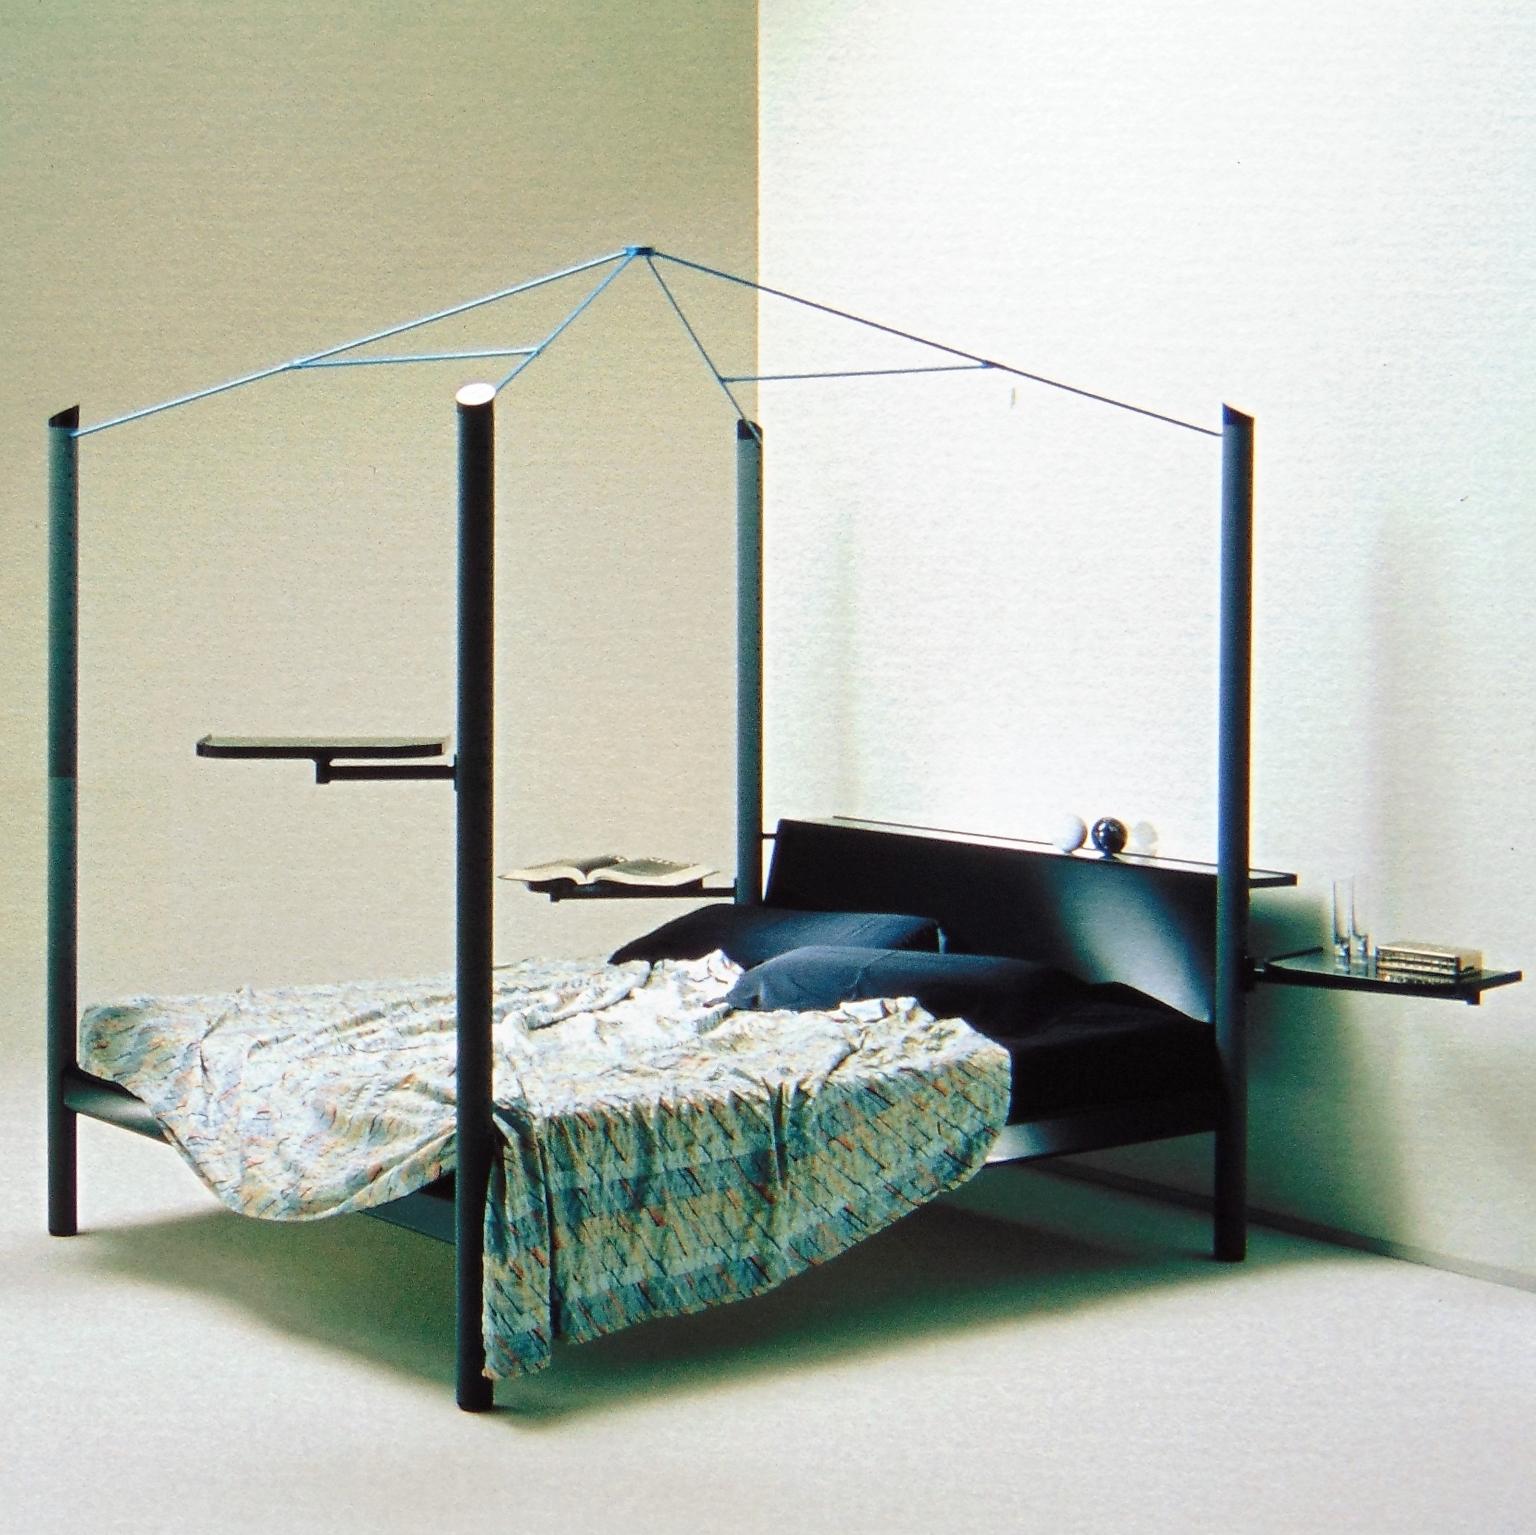 An unusual canopy bed, named Fauno, manufactured by Sormani in very dark green (almost black) glossy lacquer, with 4 columns in grey nextel and a metal canopy in light apple green. The bed has multifunctional structures all around: two trays that